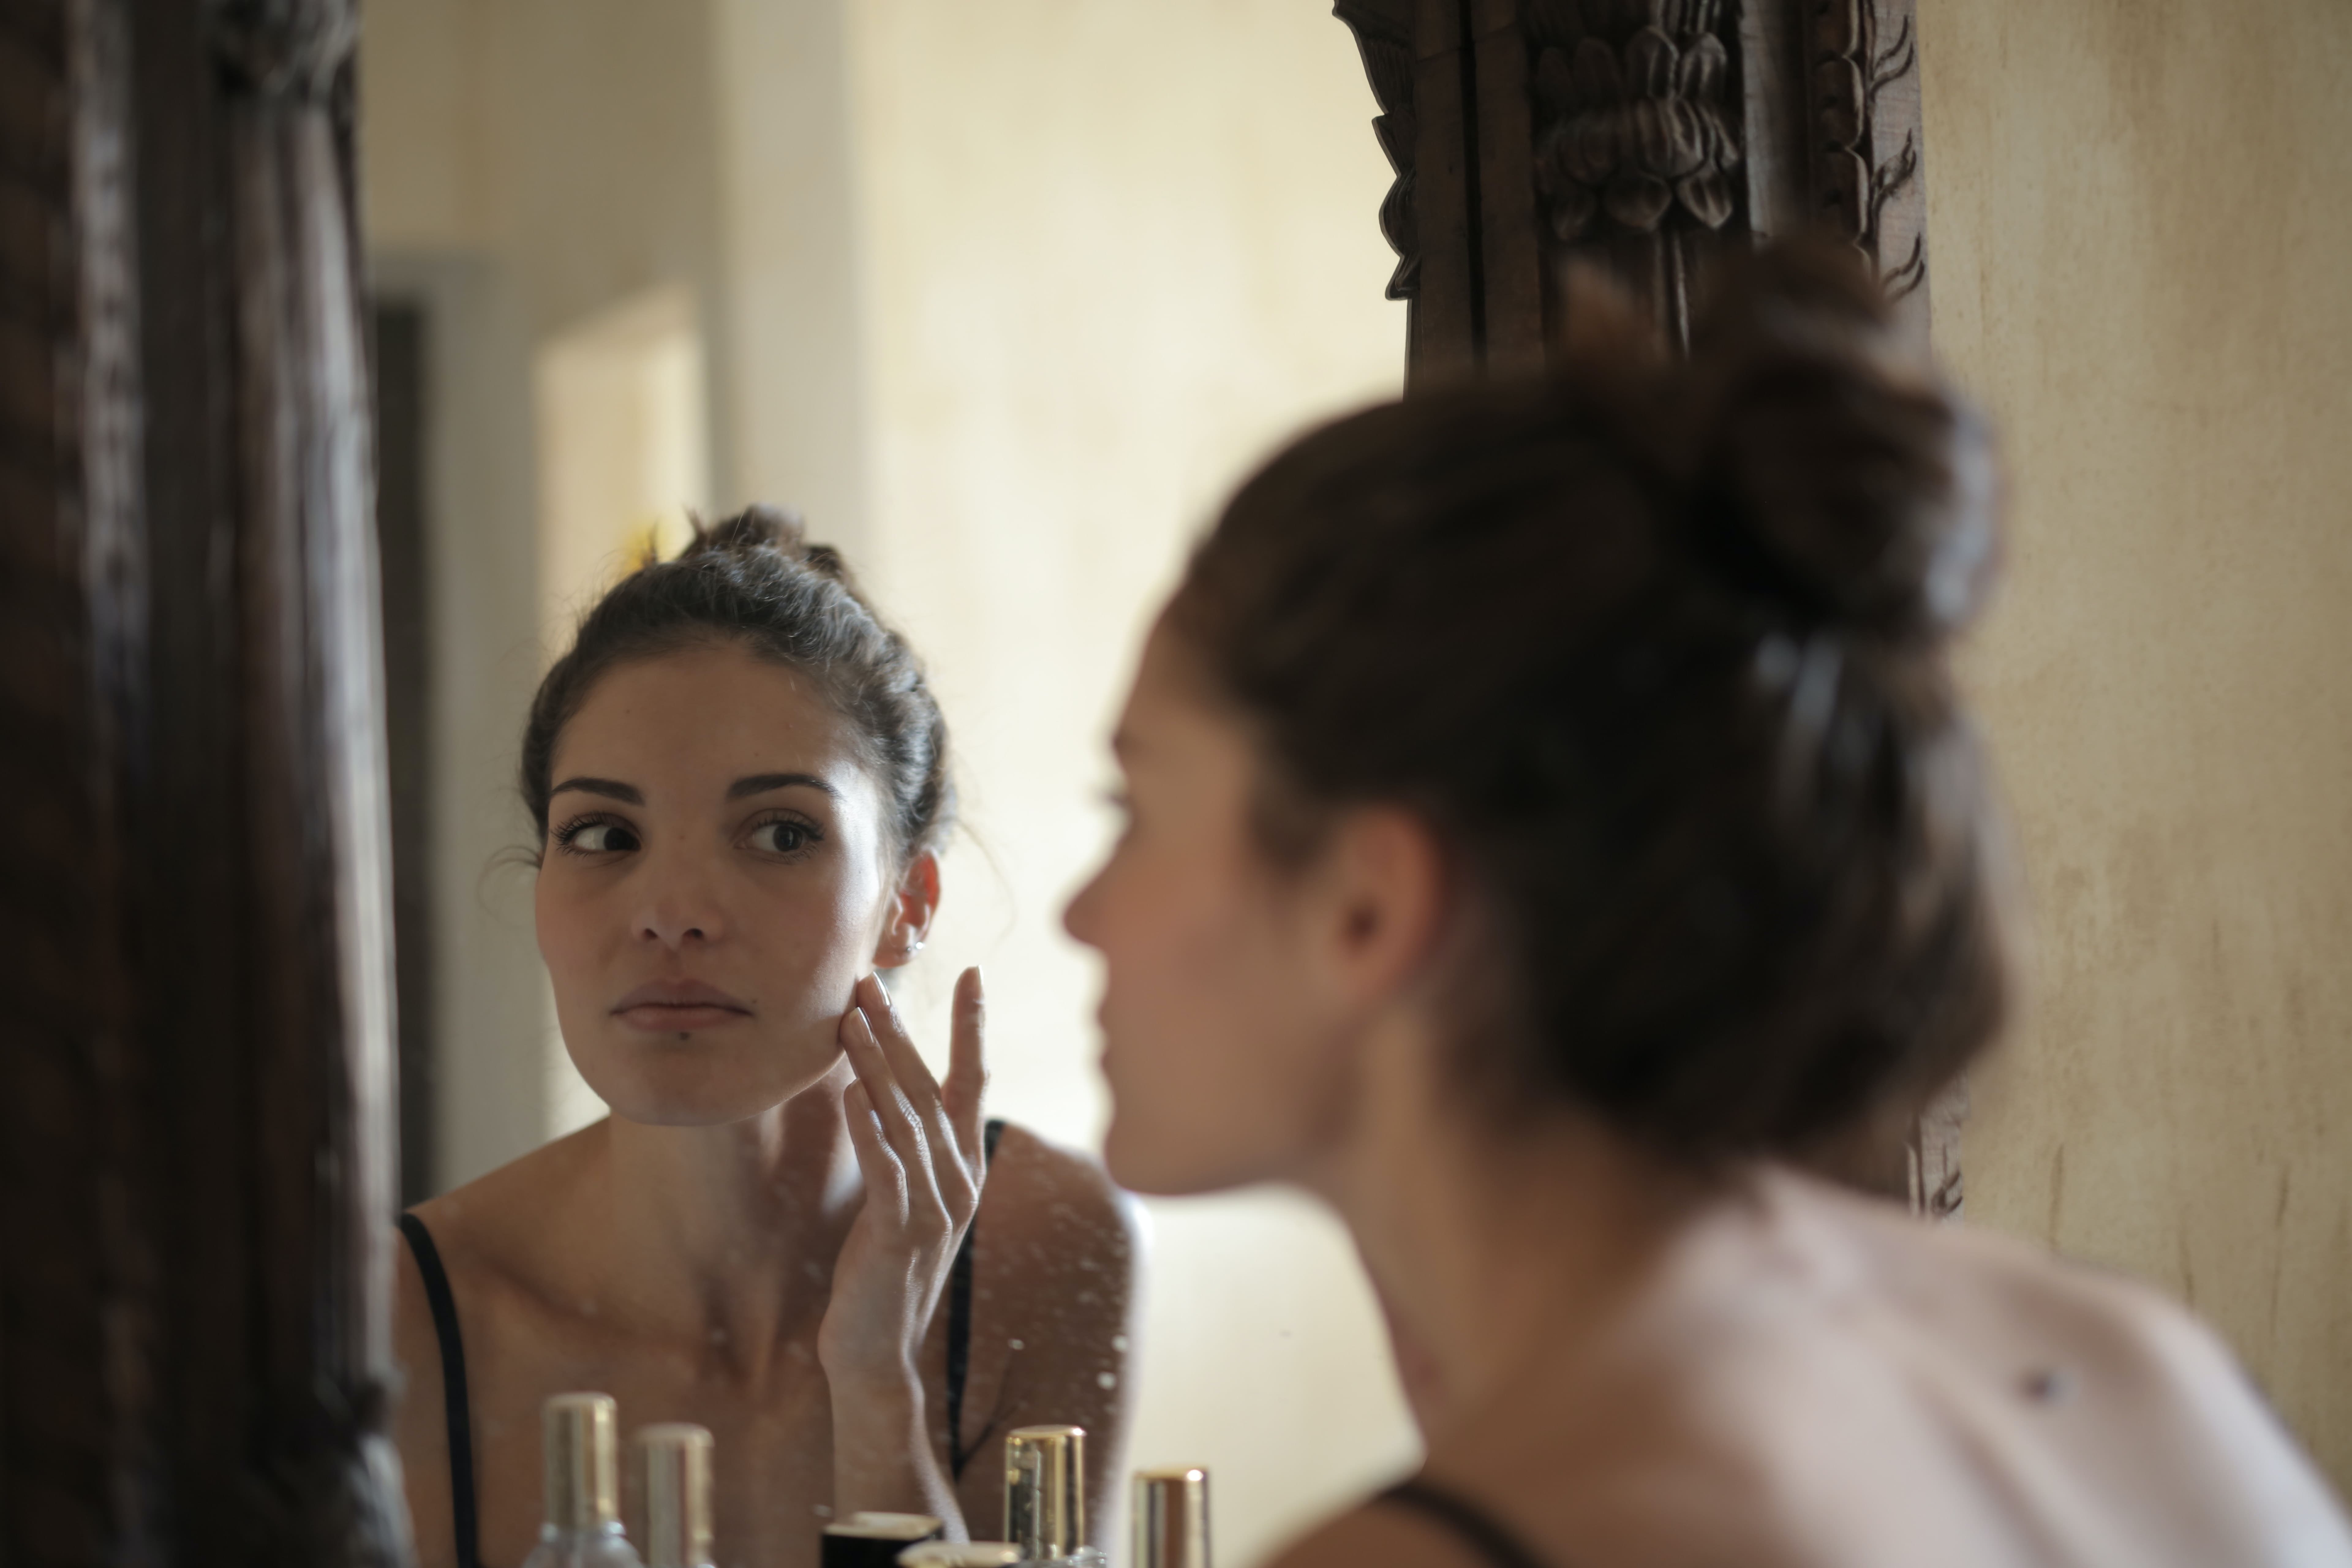 A woman checking her reflection in the mirror, contemplating whether Hypobaric Oxygen Therapy could help rejuvenate her skin.